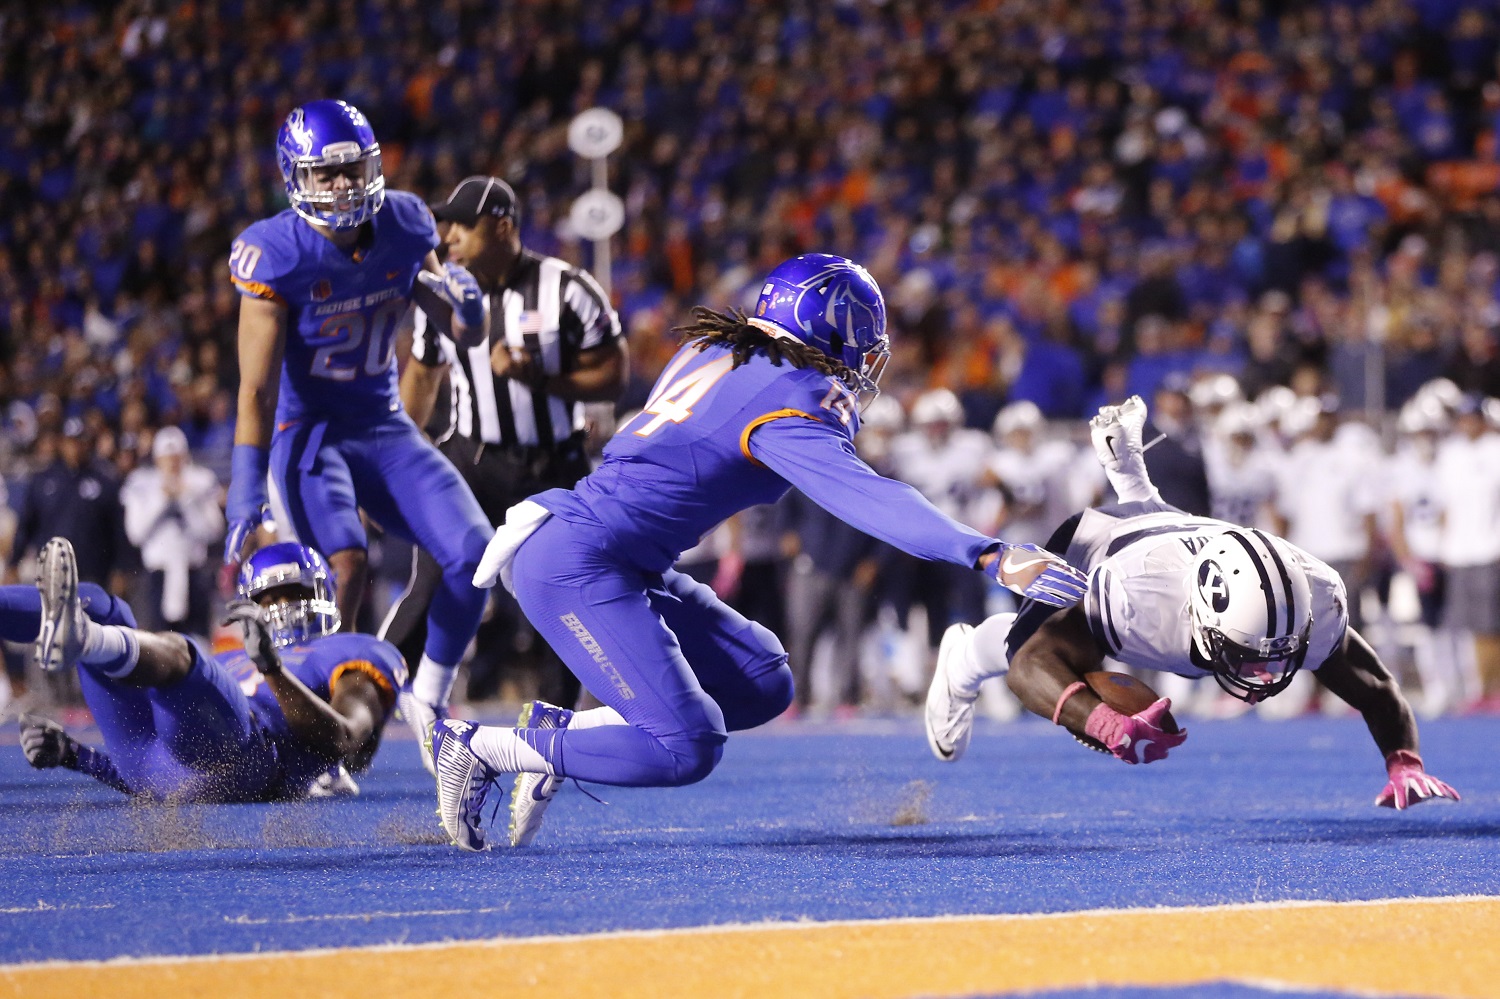 BYU running back Squally Canada falls short of a touchdown after being brought down by Boise State safety Chanceller James (left, on ground) during the second half of an NCAA college football game in Boise, Idaho, Thursday, Oct. 20, 2016. Boise State won 28-27. (AP Photo/Otto Kitsinger)